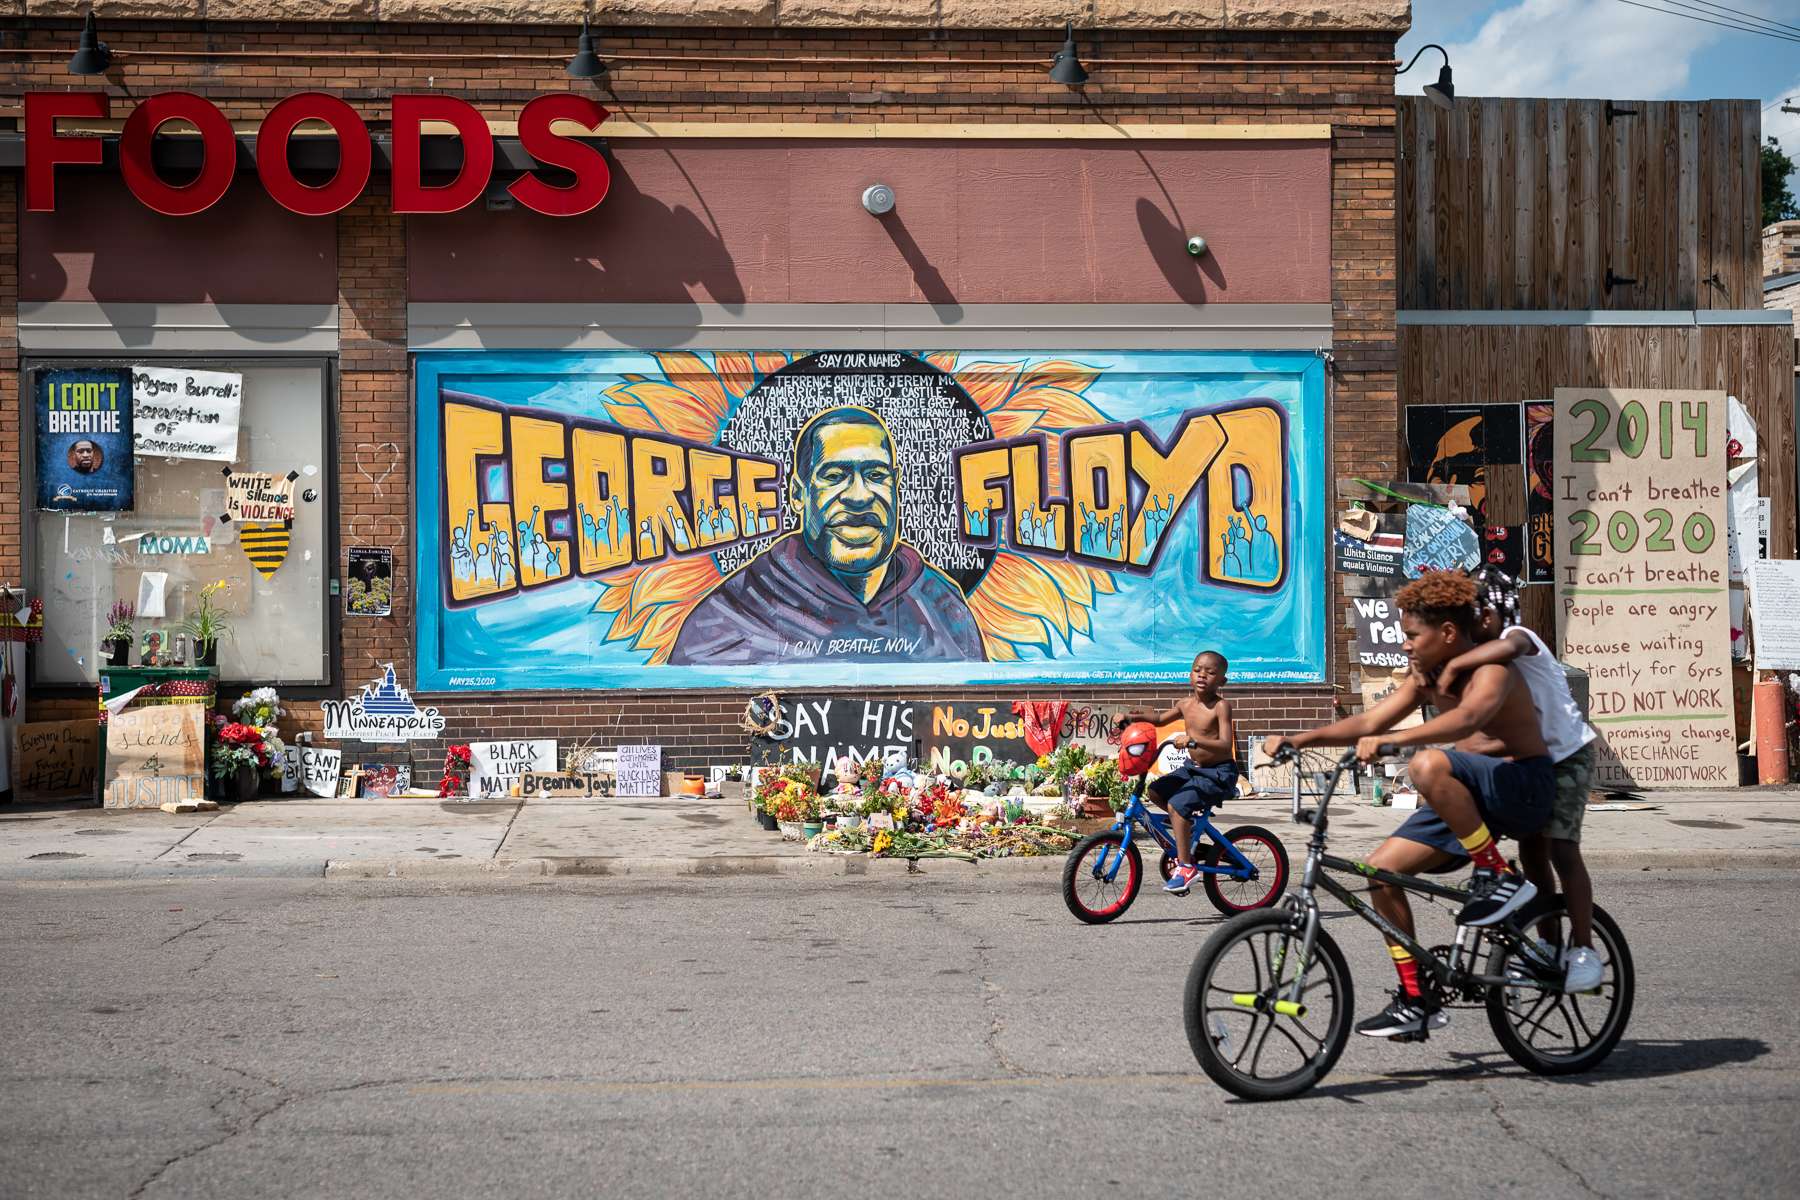 Young boys ride by one of the murals at the George Floyd Memorial site in Minneapolis, MN on July 17, 2020.